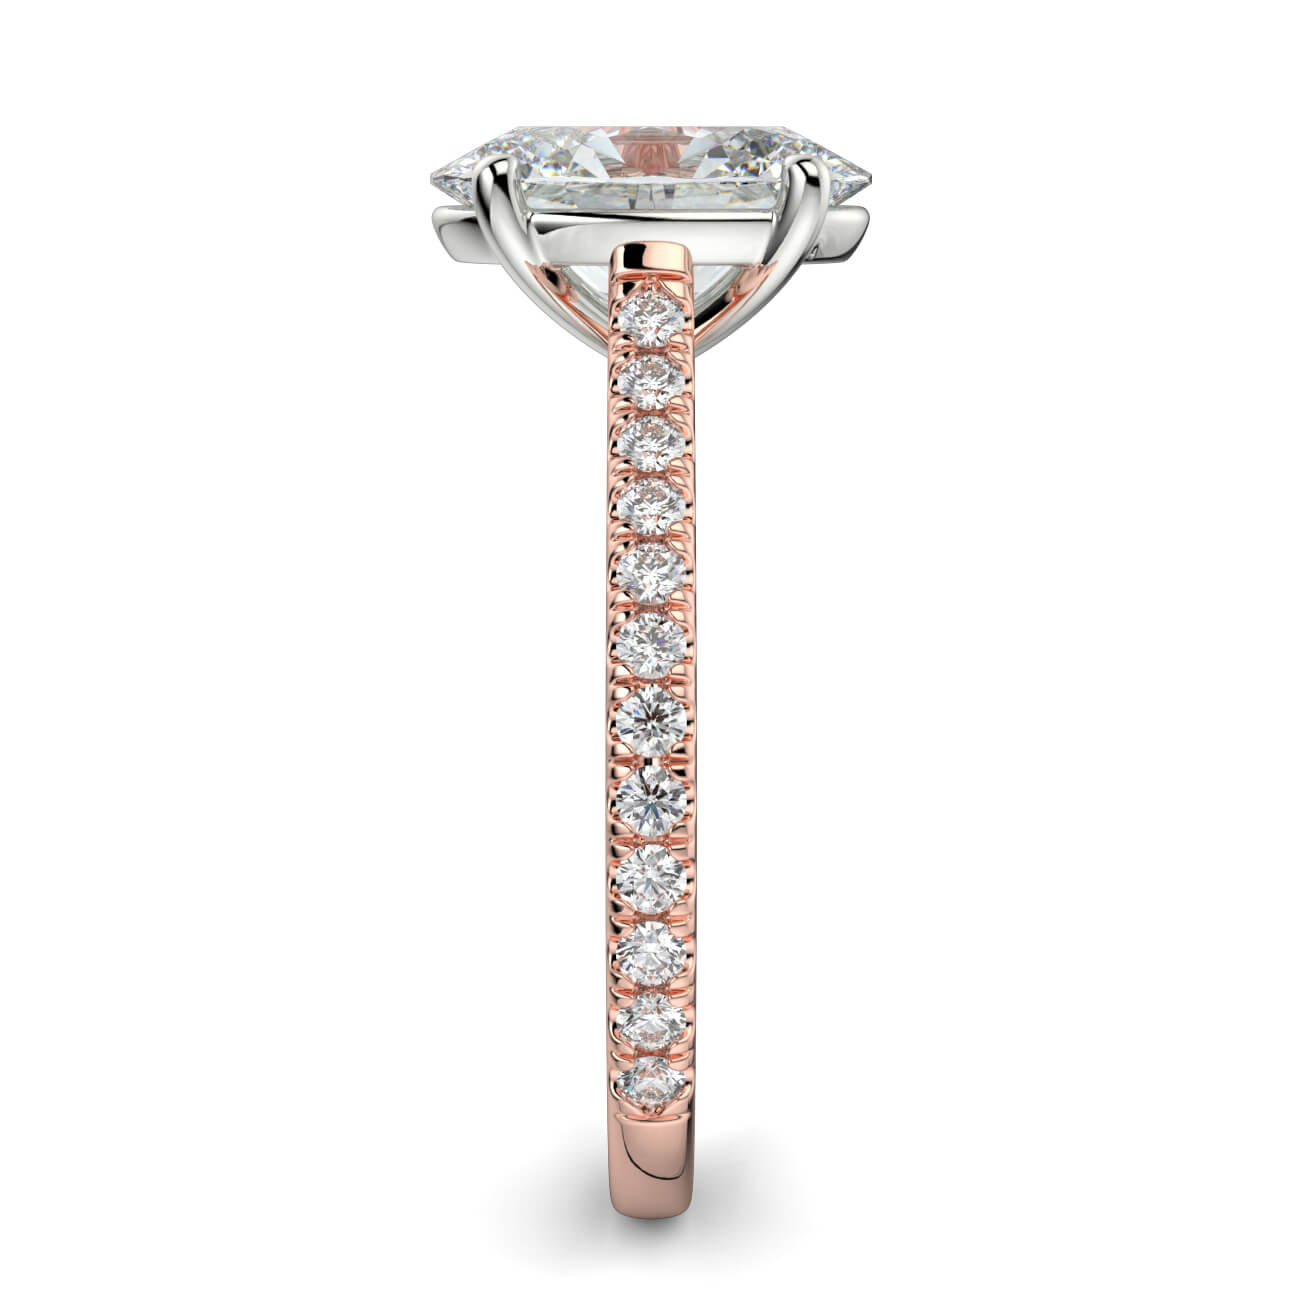 Oval shape diamond cathedral engagement ring in rose and white gold – Australian Diamond Network